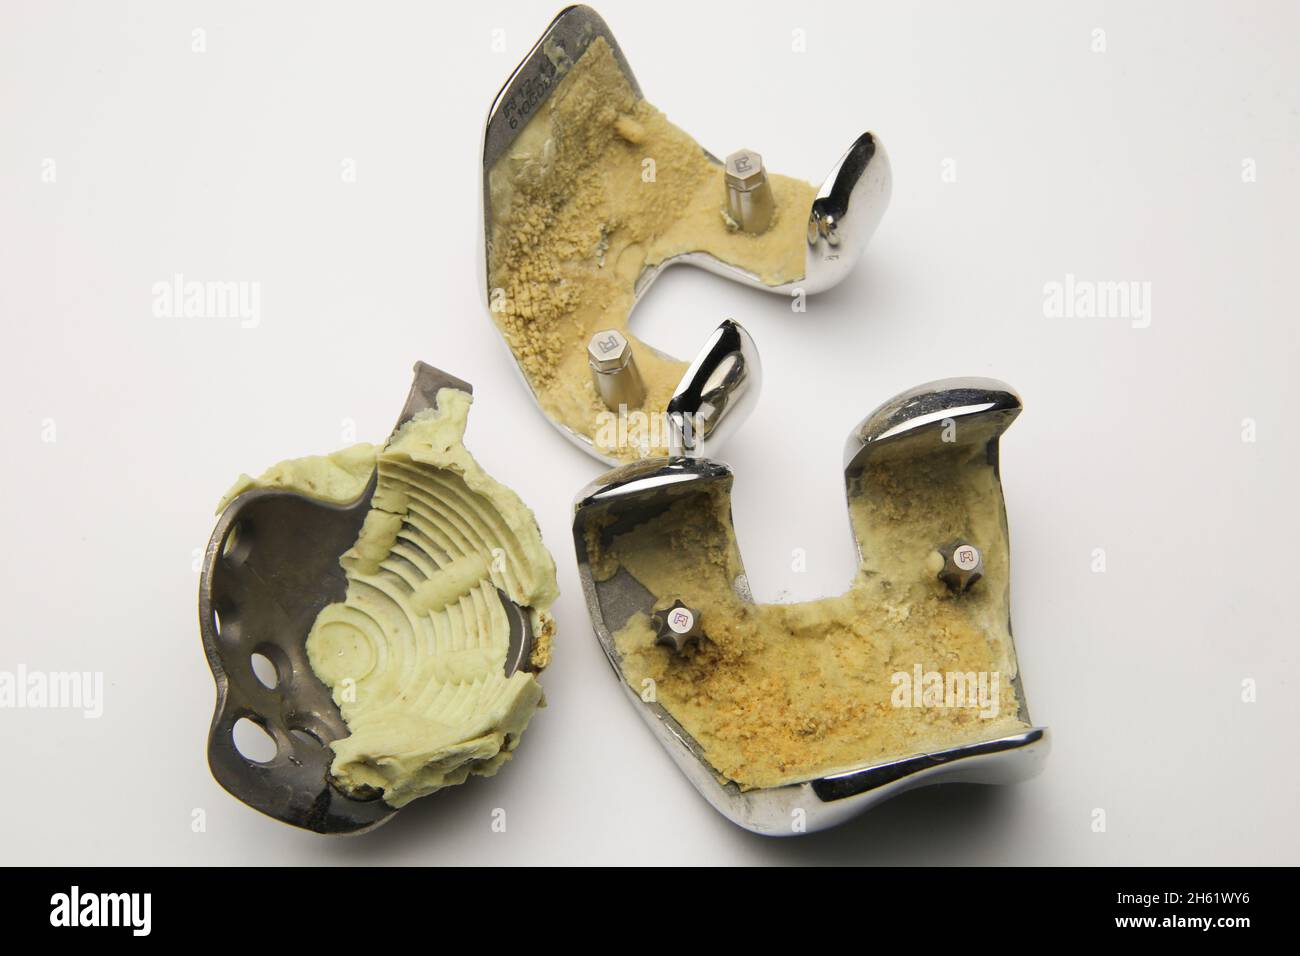 Viersen, Germany - June 9. 2021: Closeup of implant parts for orthopedic artificial hip nad knee joint replacement surgery with bone cement Stock Photo